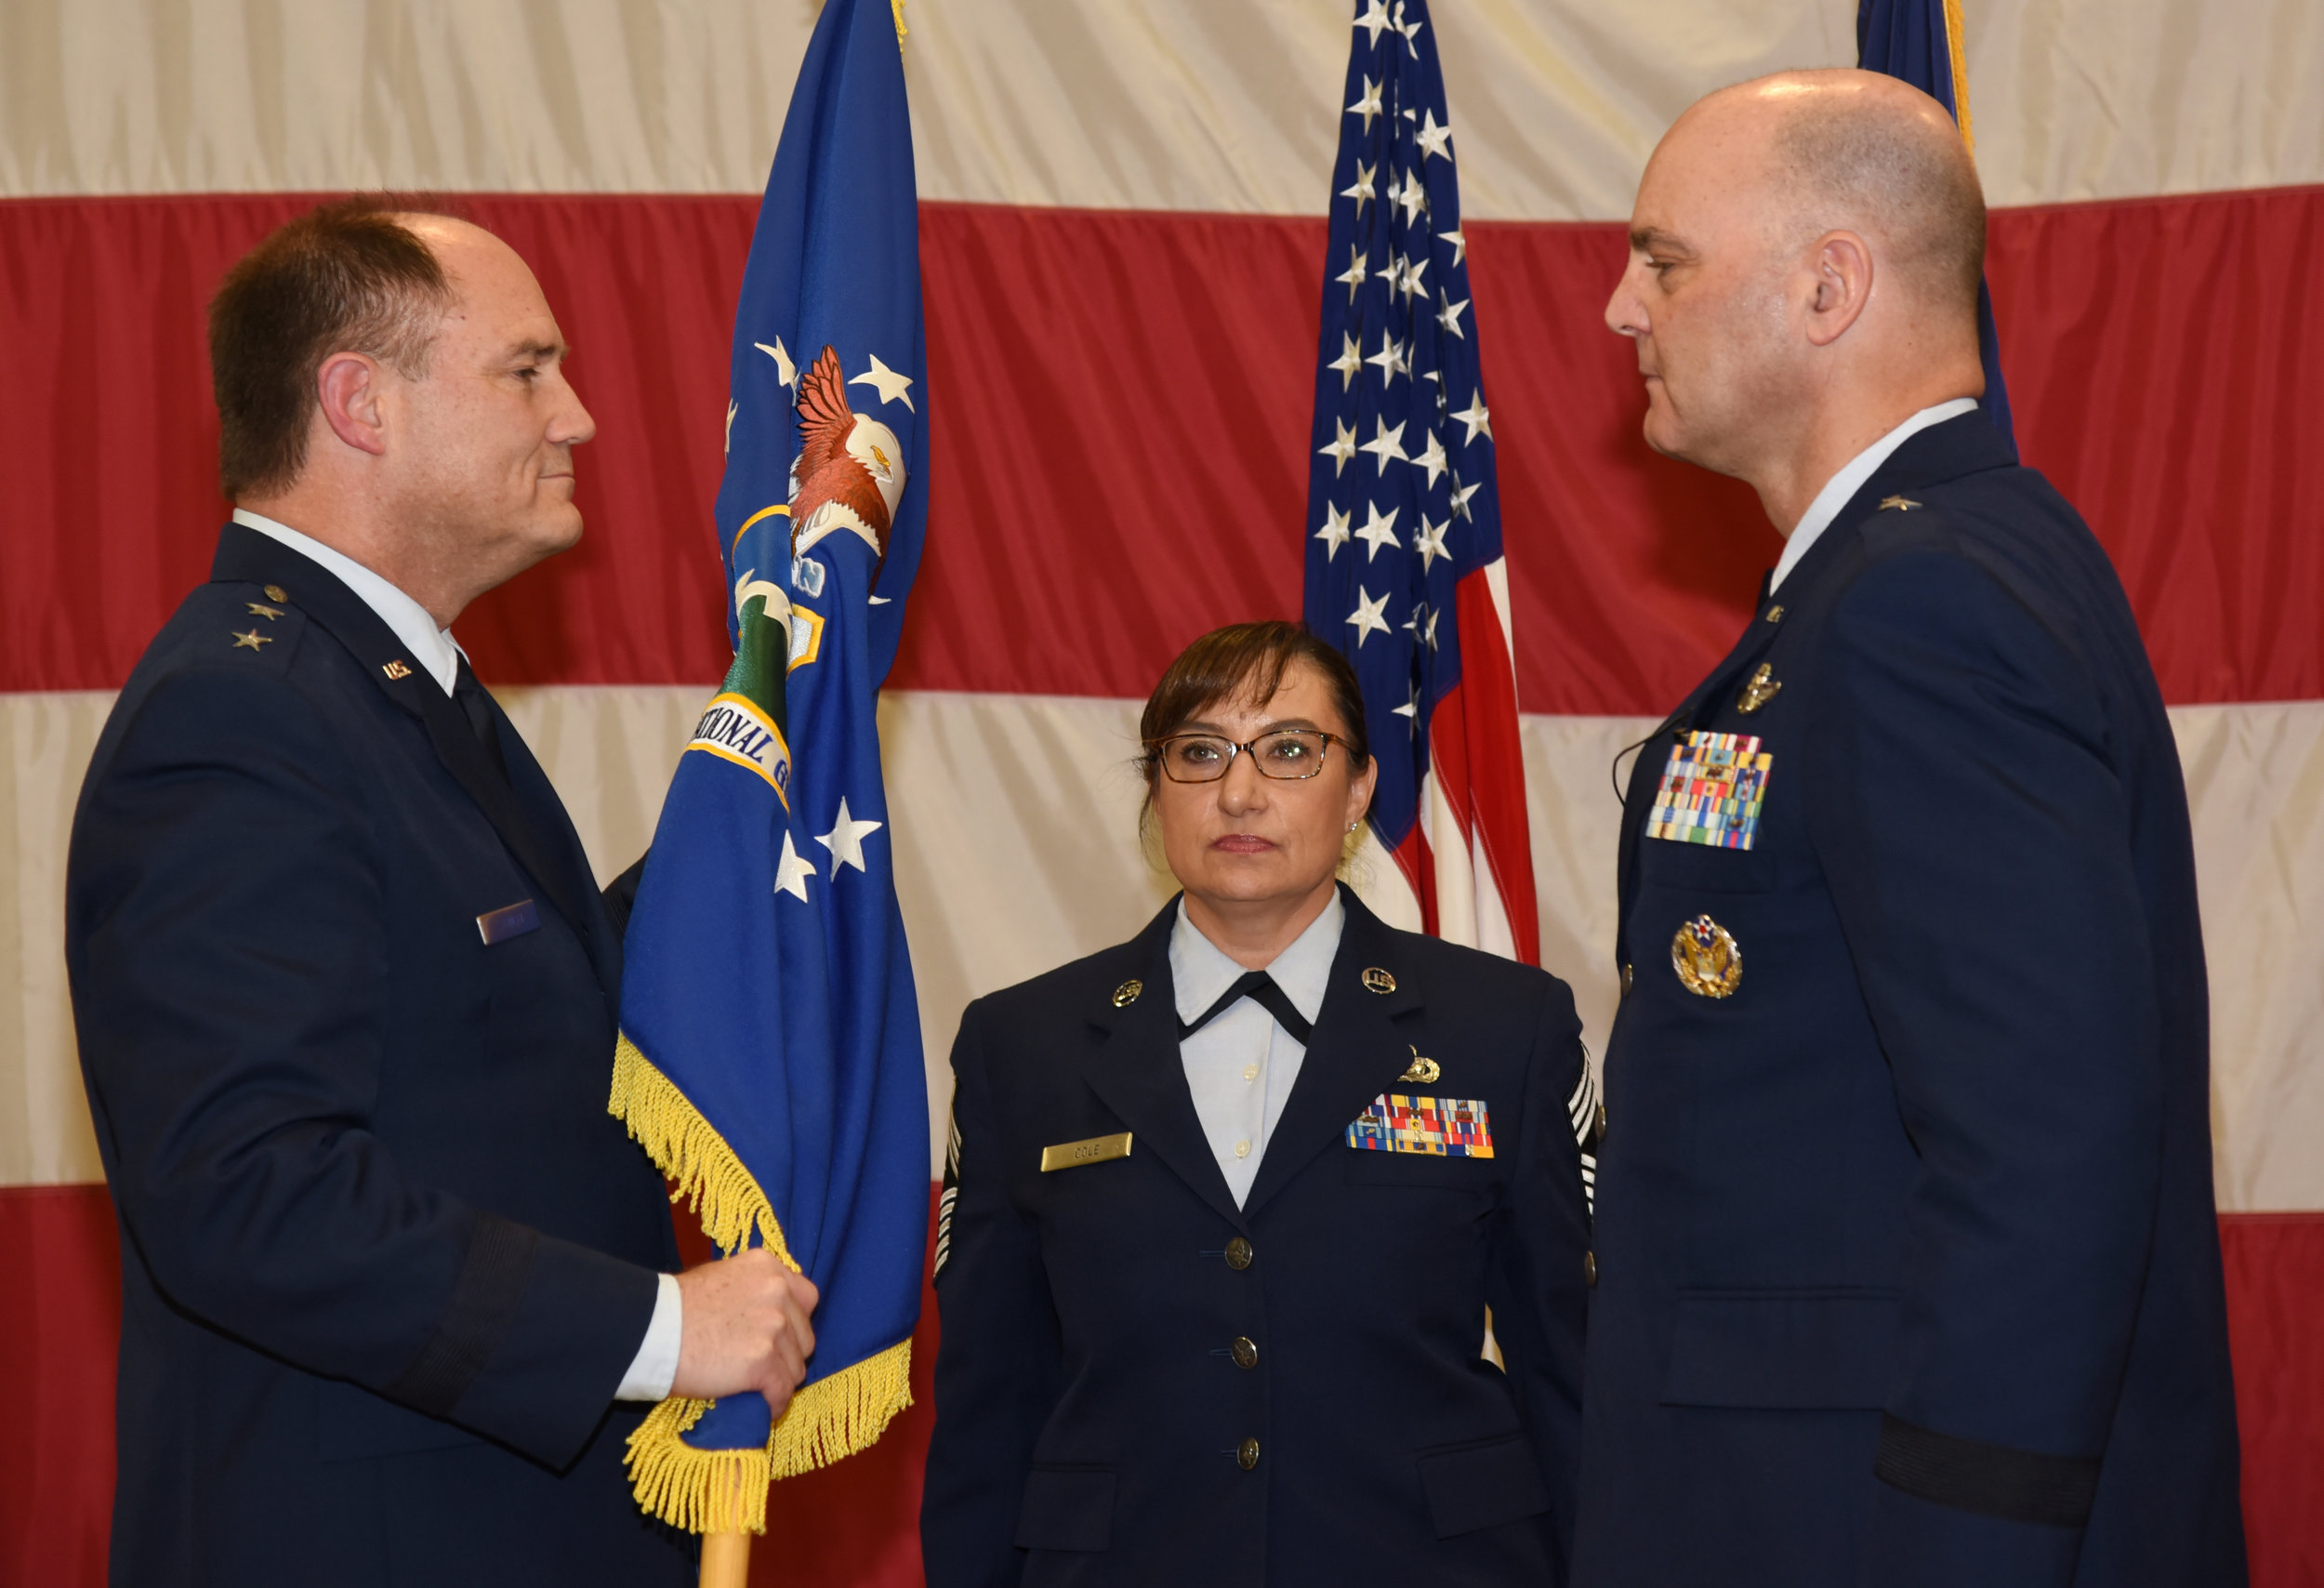  Brig. Gen. James R. Kriesel (right), incoming commander, Oregon Air National Guard, assumes command from Maj. Gen. Michael E. Stencel (left), Adjutant General, Oregon, as Chief Master Sgt. Ulana Cole, State Command Chief, looks on during a change of